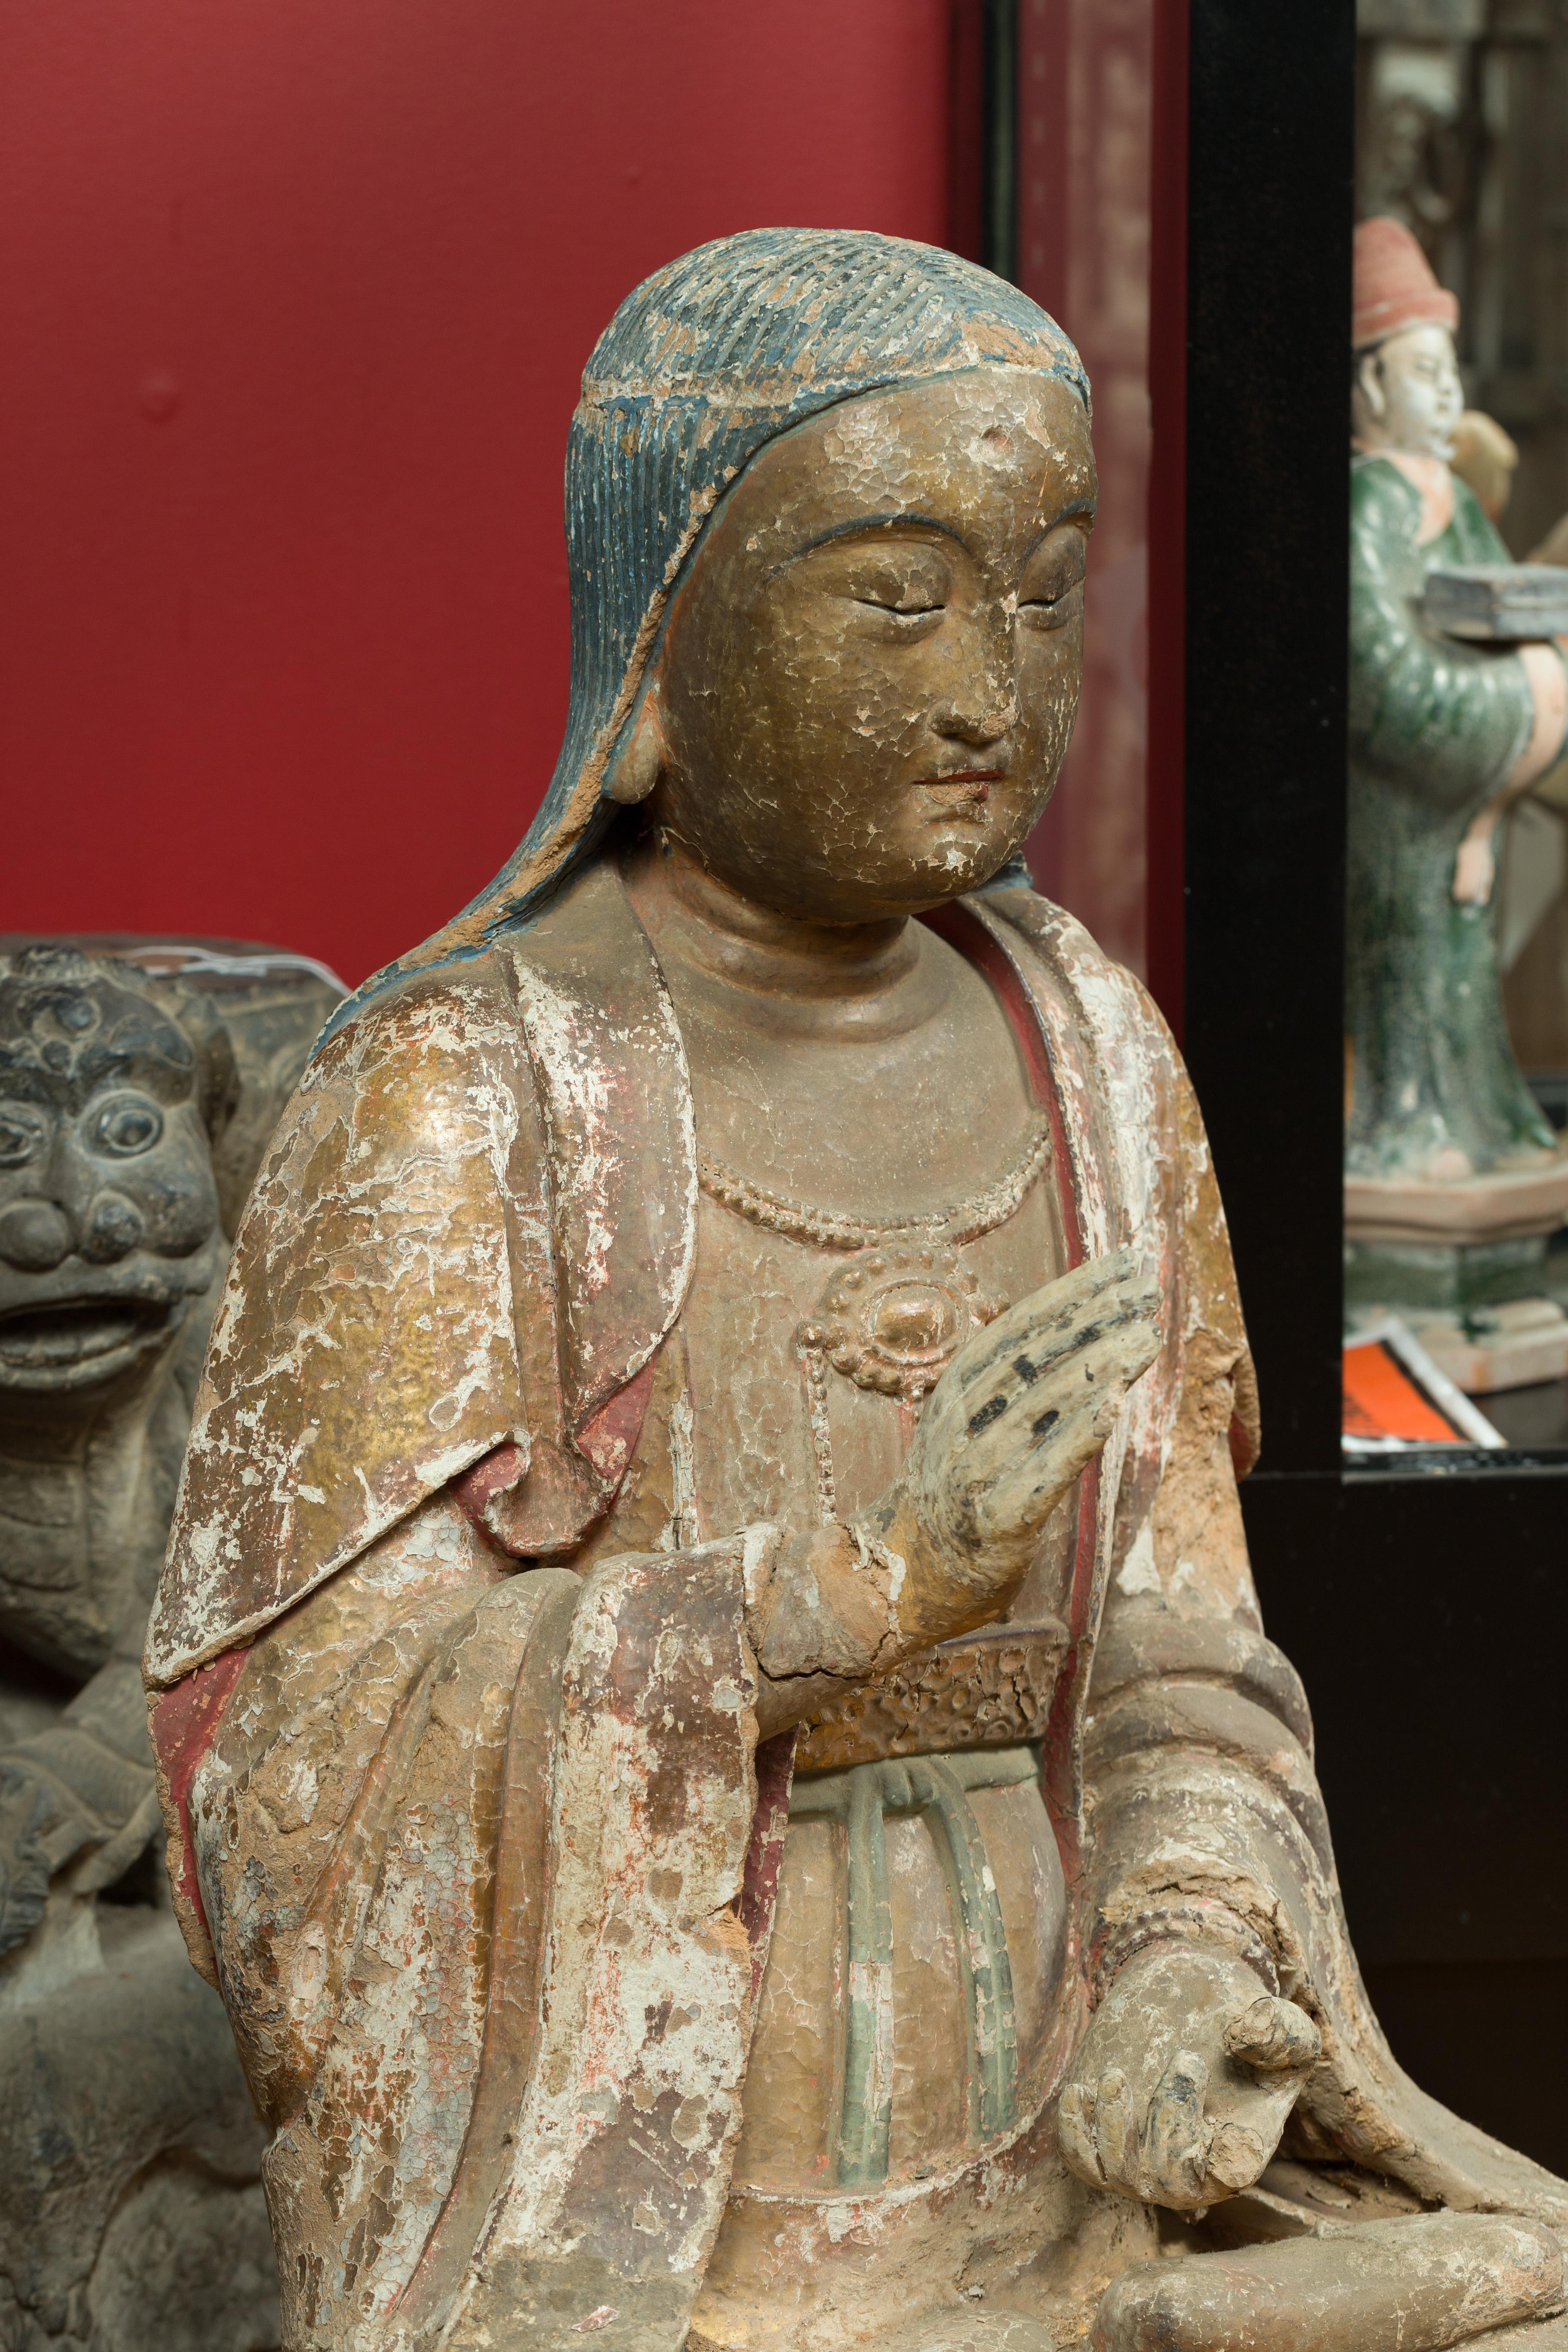 Chinese Song Dynasty Stucco Sculpture of Guanyin, Bodhisattva of Compassion 6